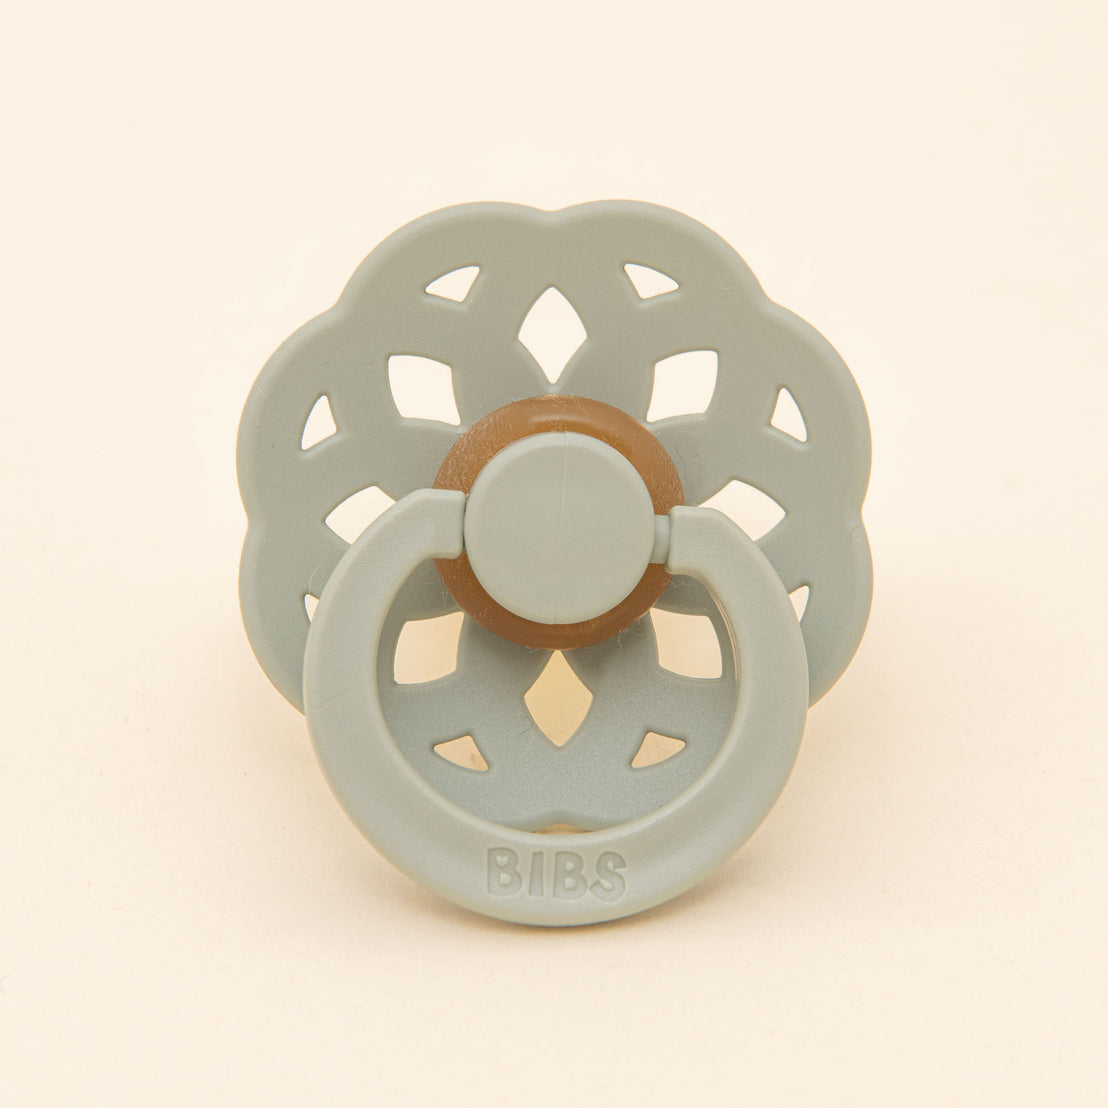 The sage green Mila Pacifier with a round silicone nipple and a flower-shaped shield set against a soft beige background.